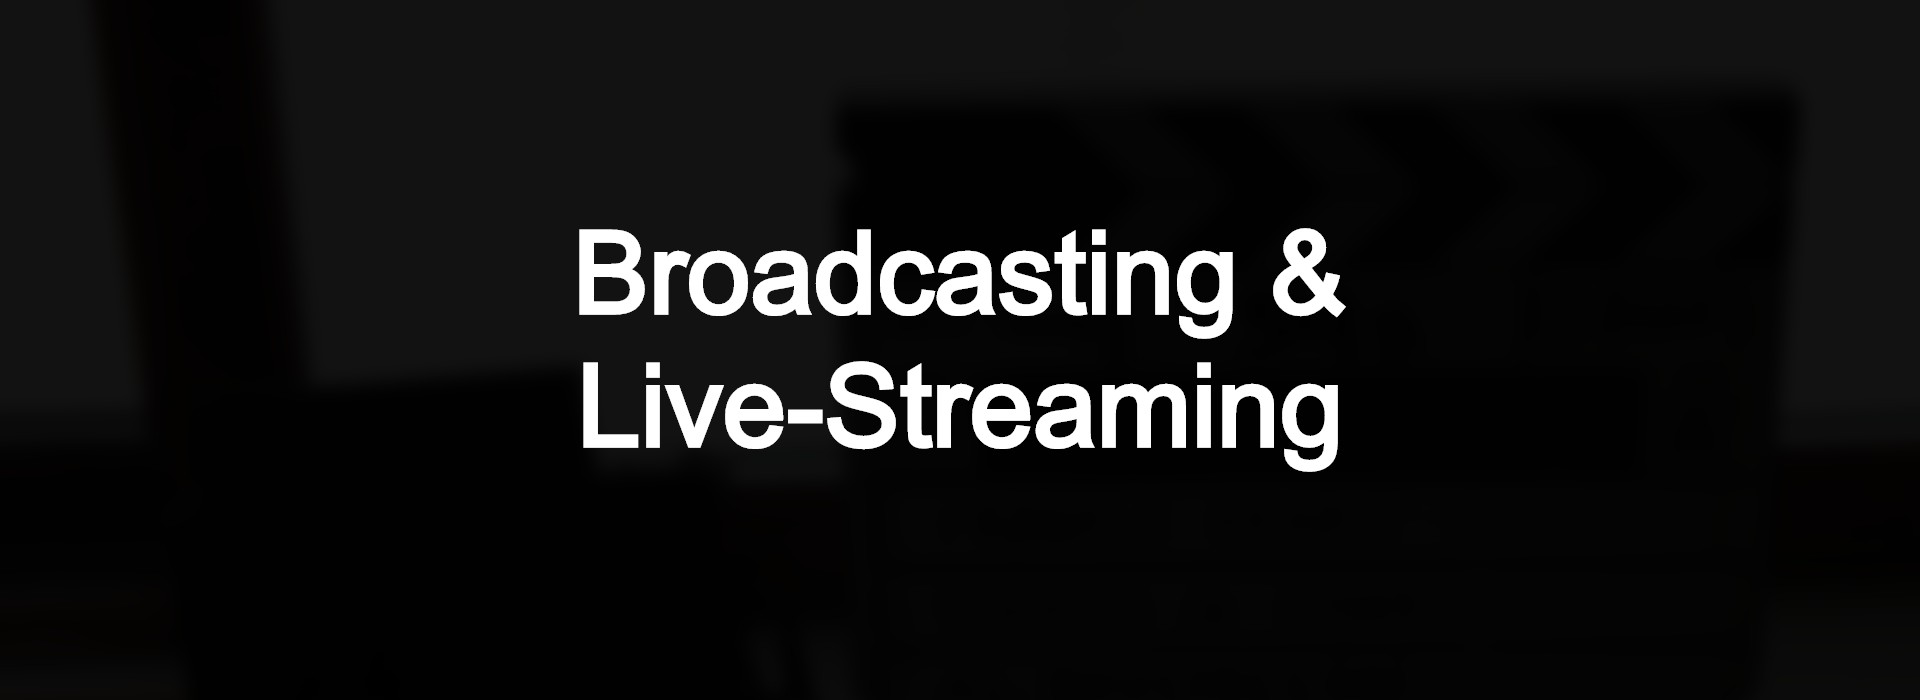 Broadcasting & Live-streaming page banner.